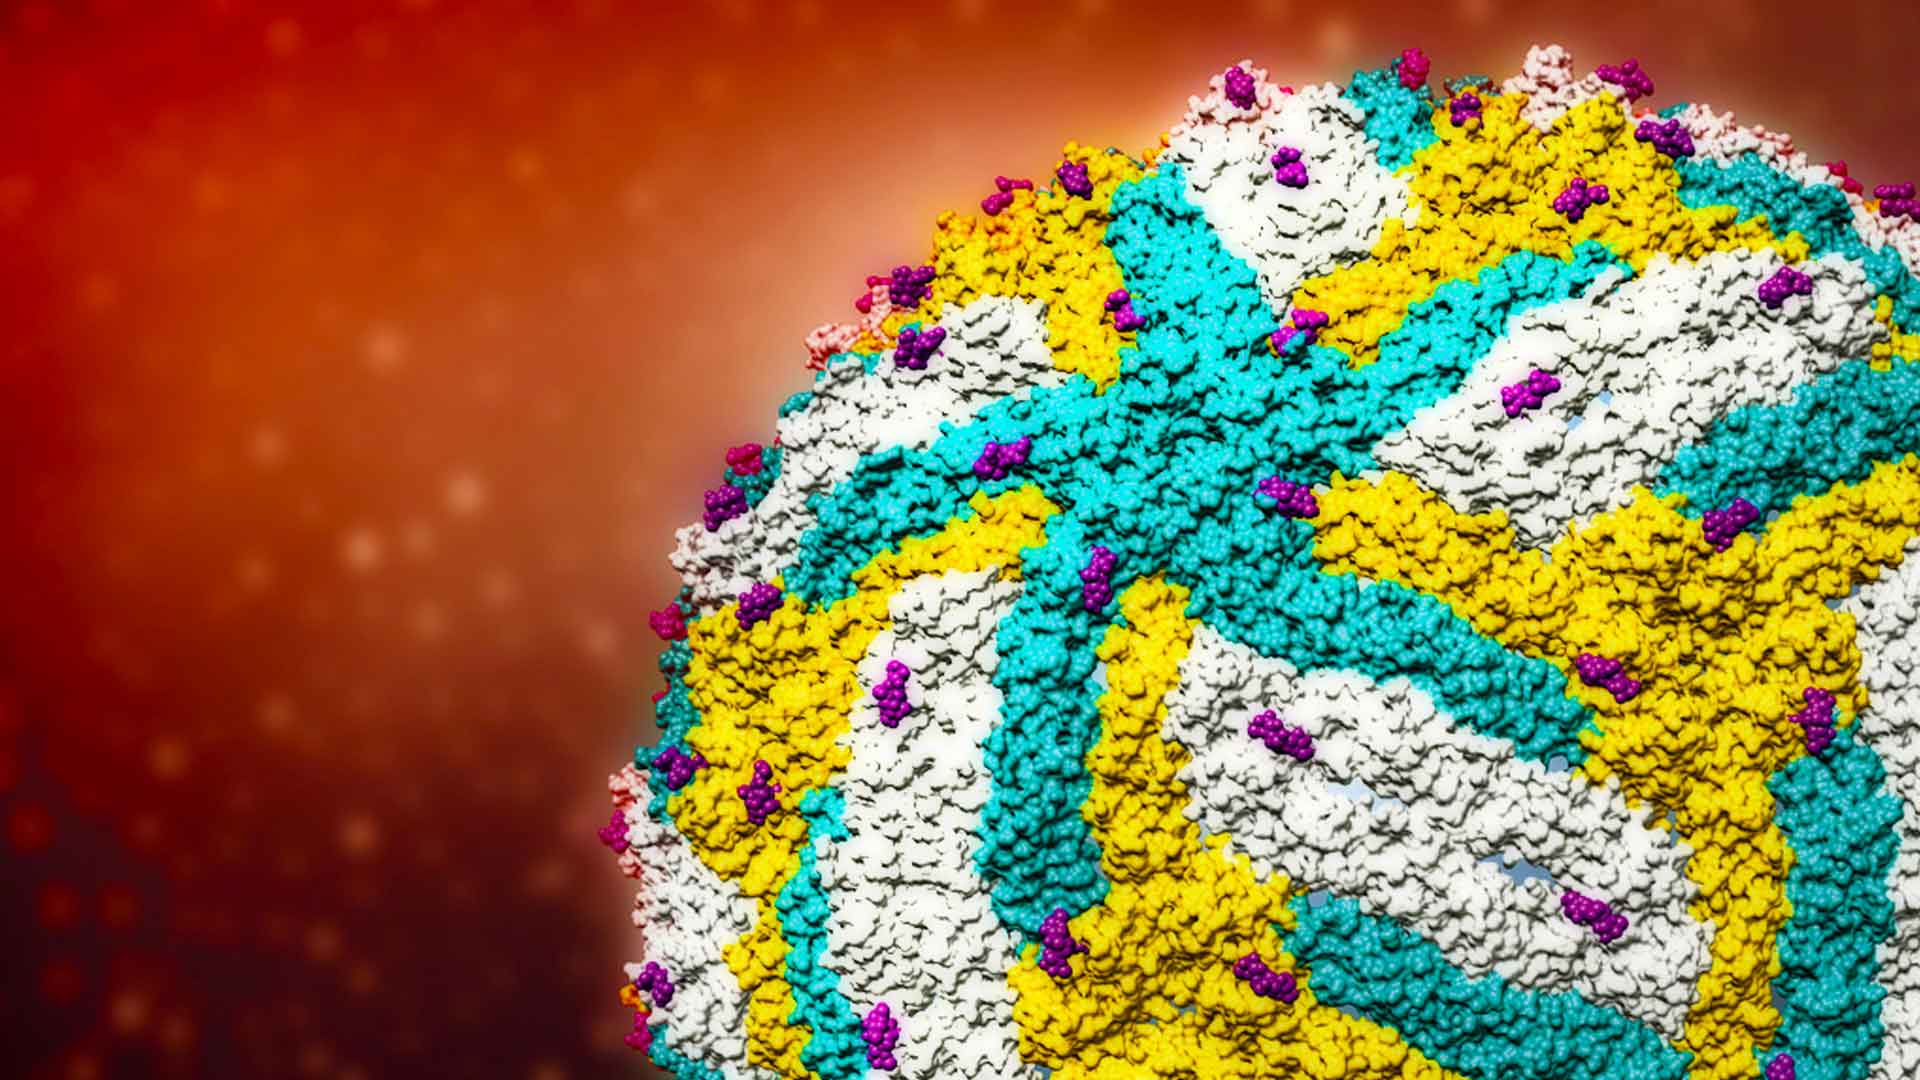 STRUCTURE OF THE THERMALLY STABLE ZIKA VIRUS